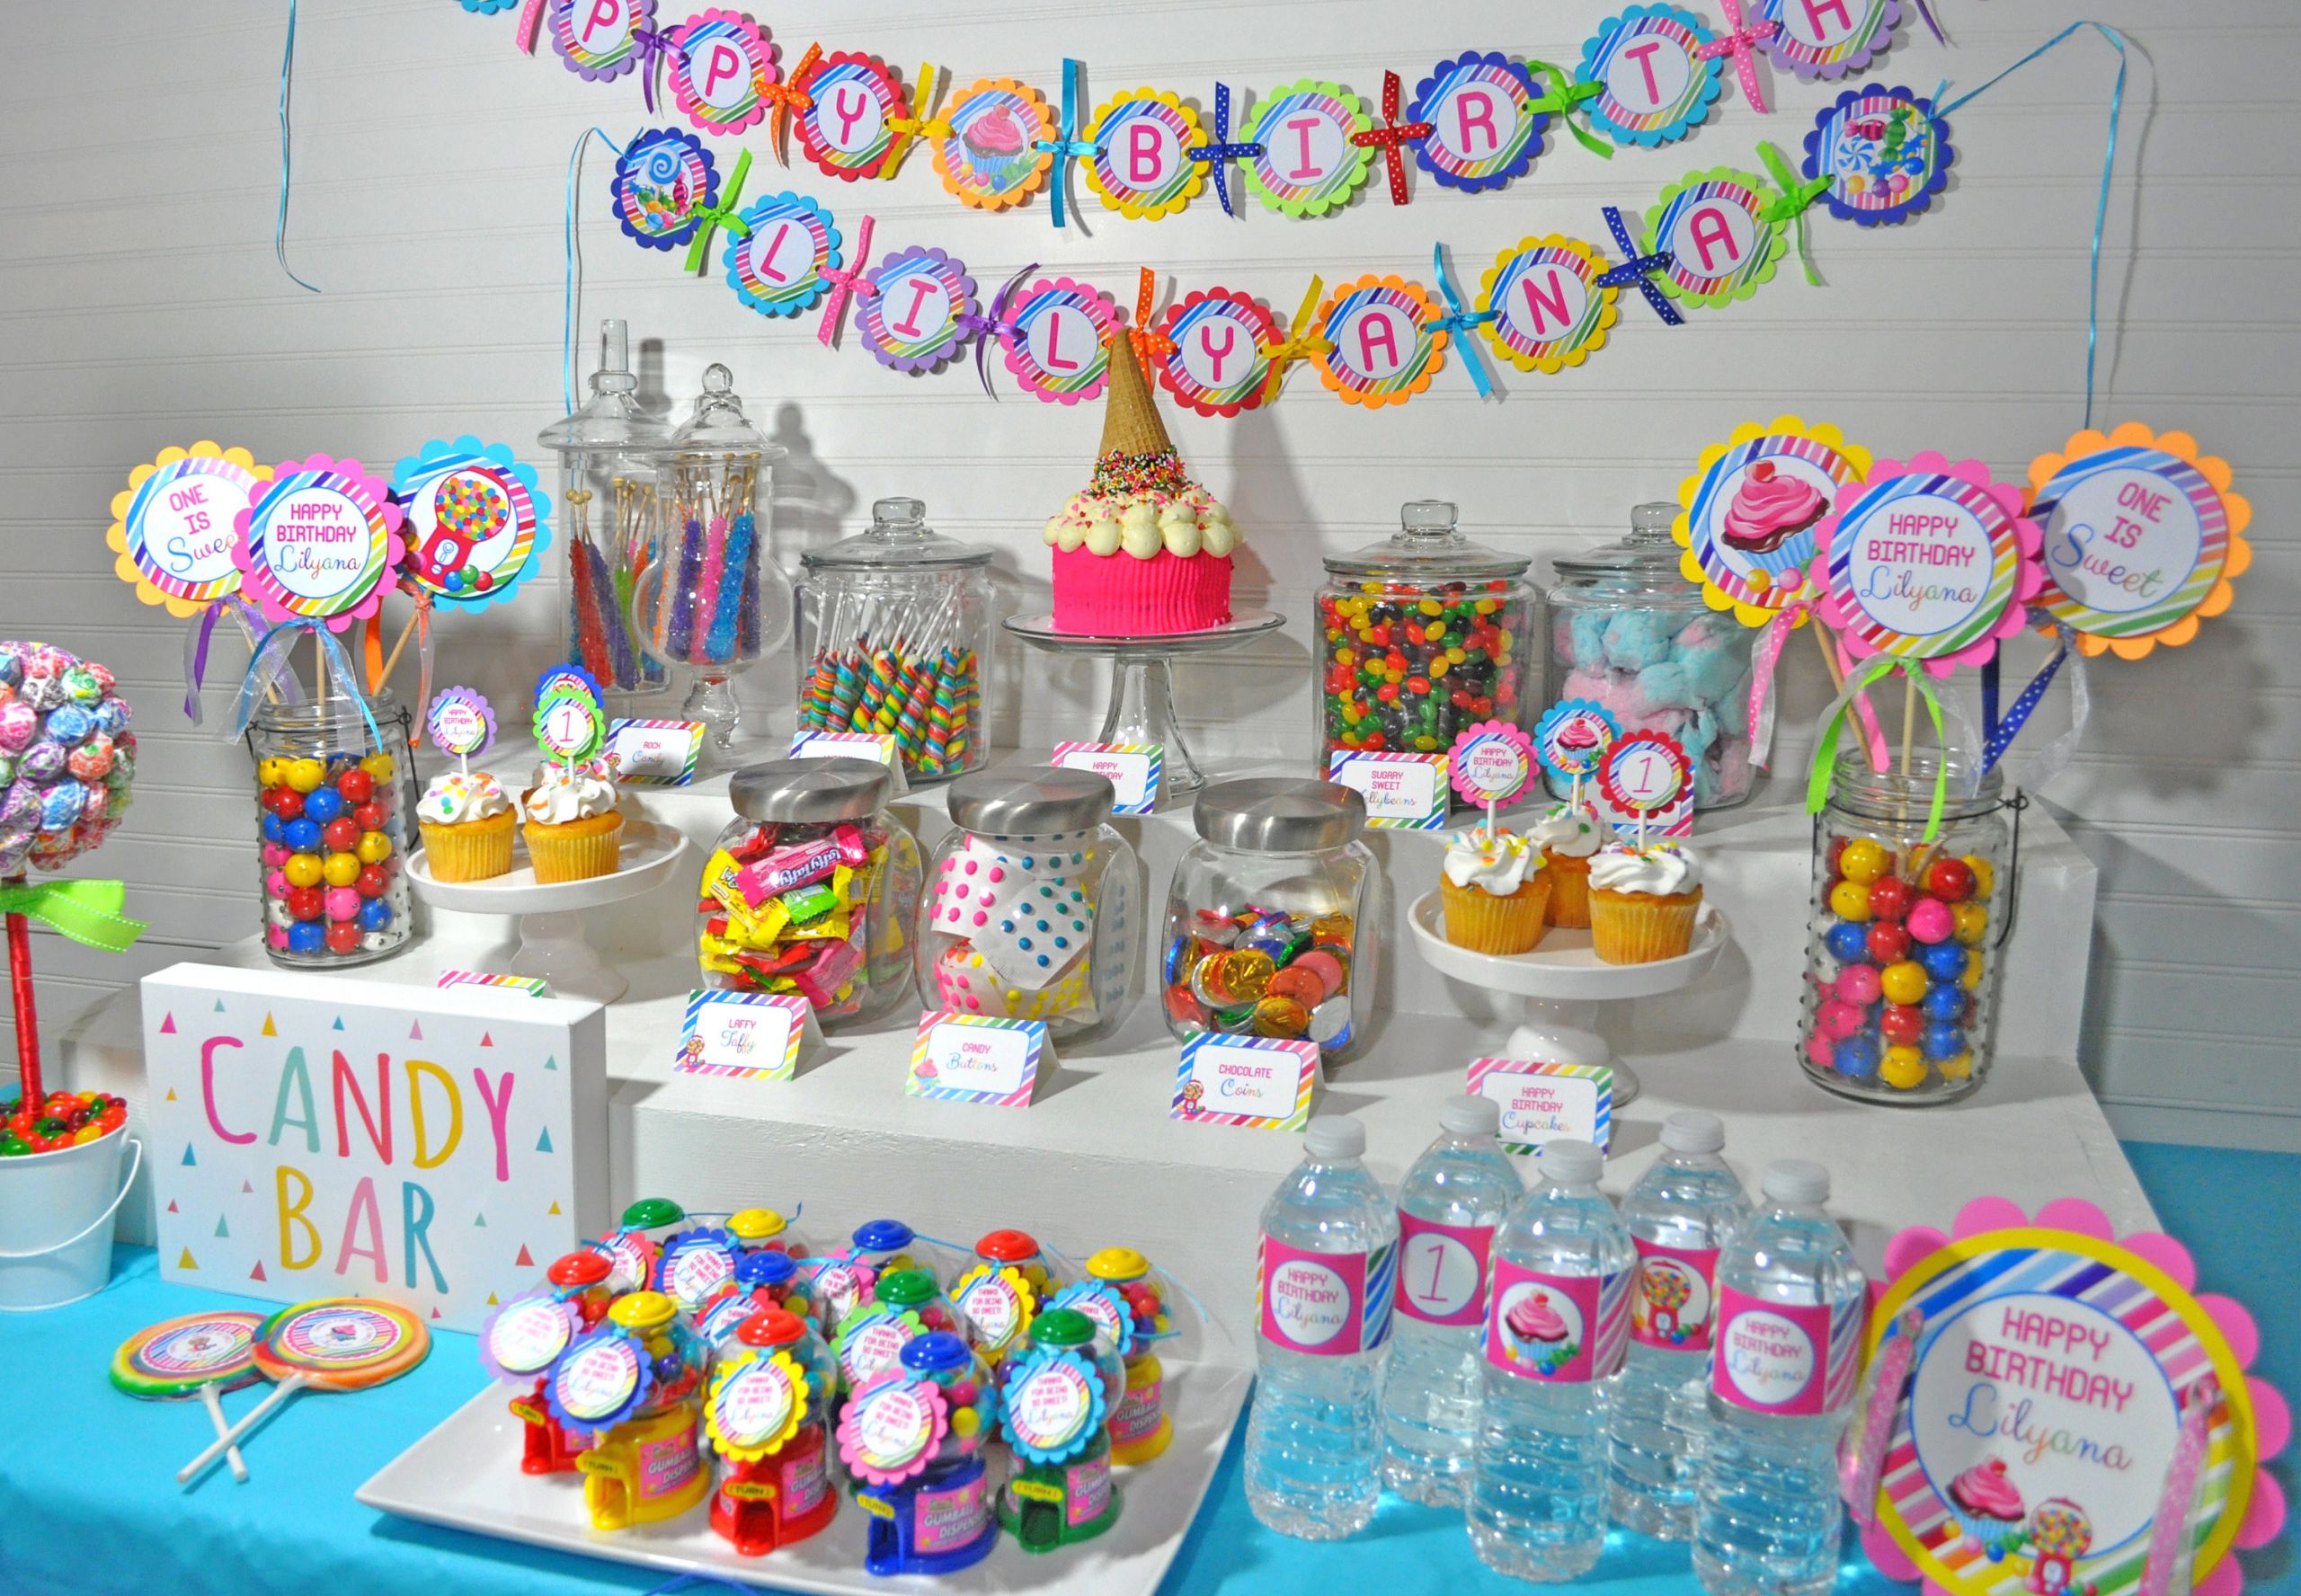 Candyland 1St Birthday Party Ideas
 Cupcake Toppers Candy Sweet Shoppe Birthday 1st Birthday